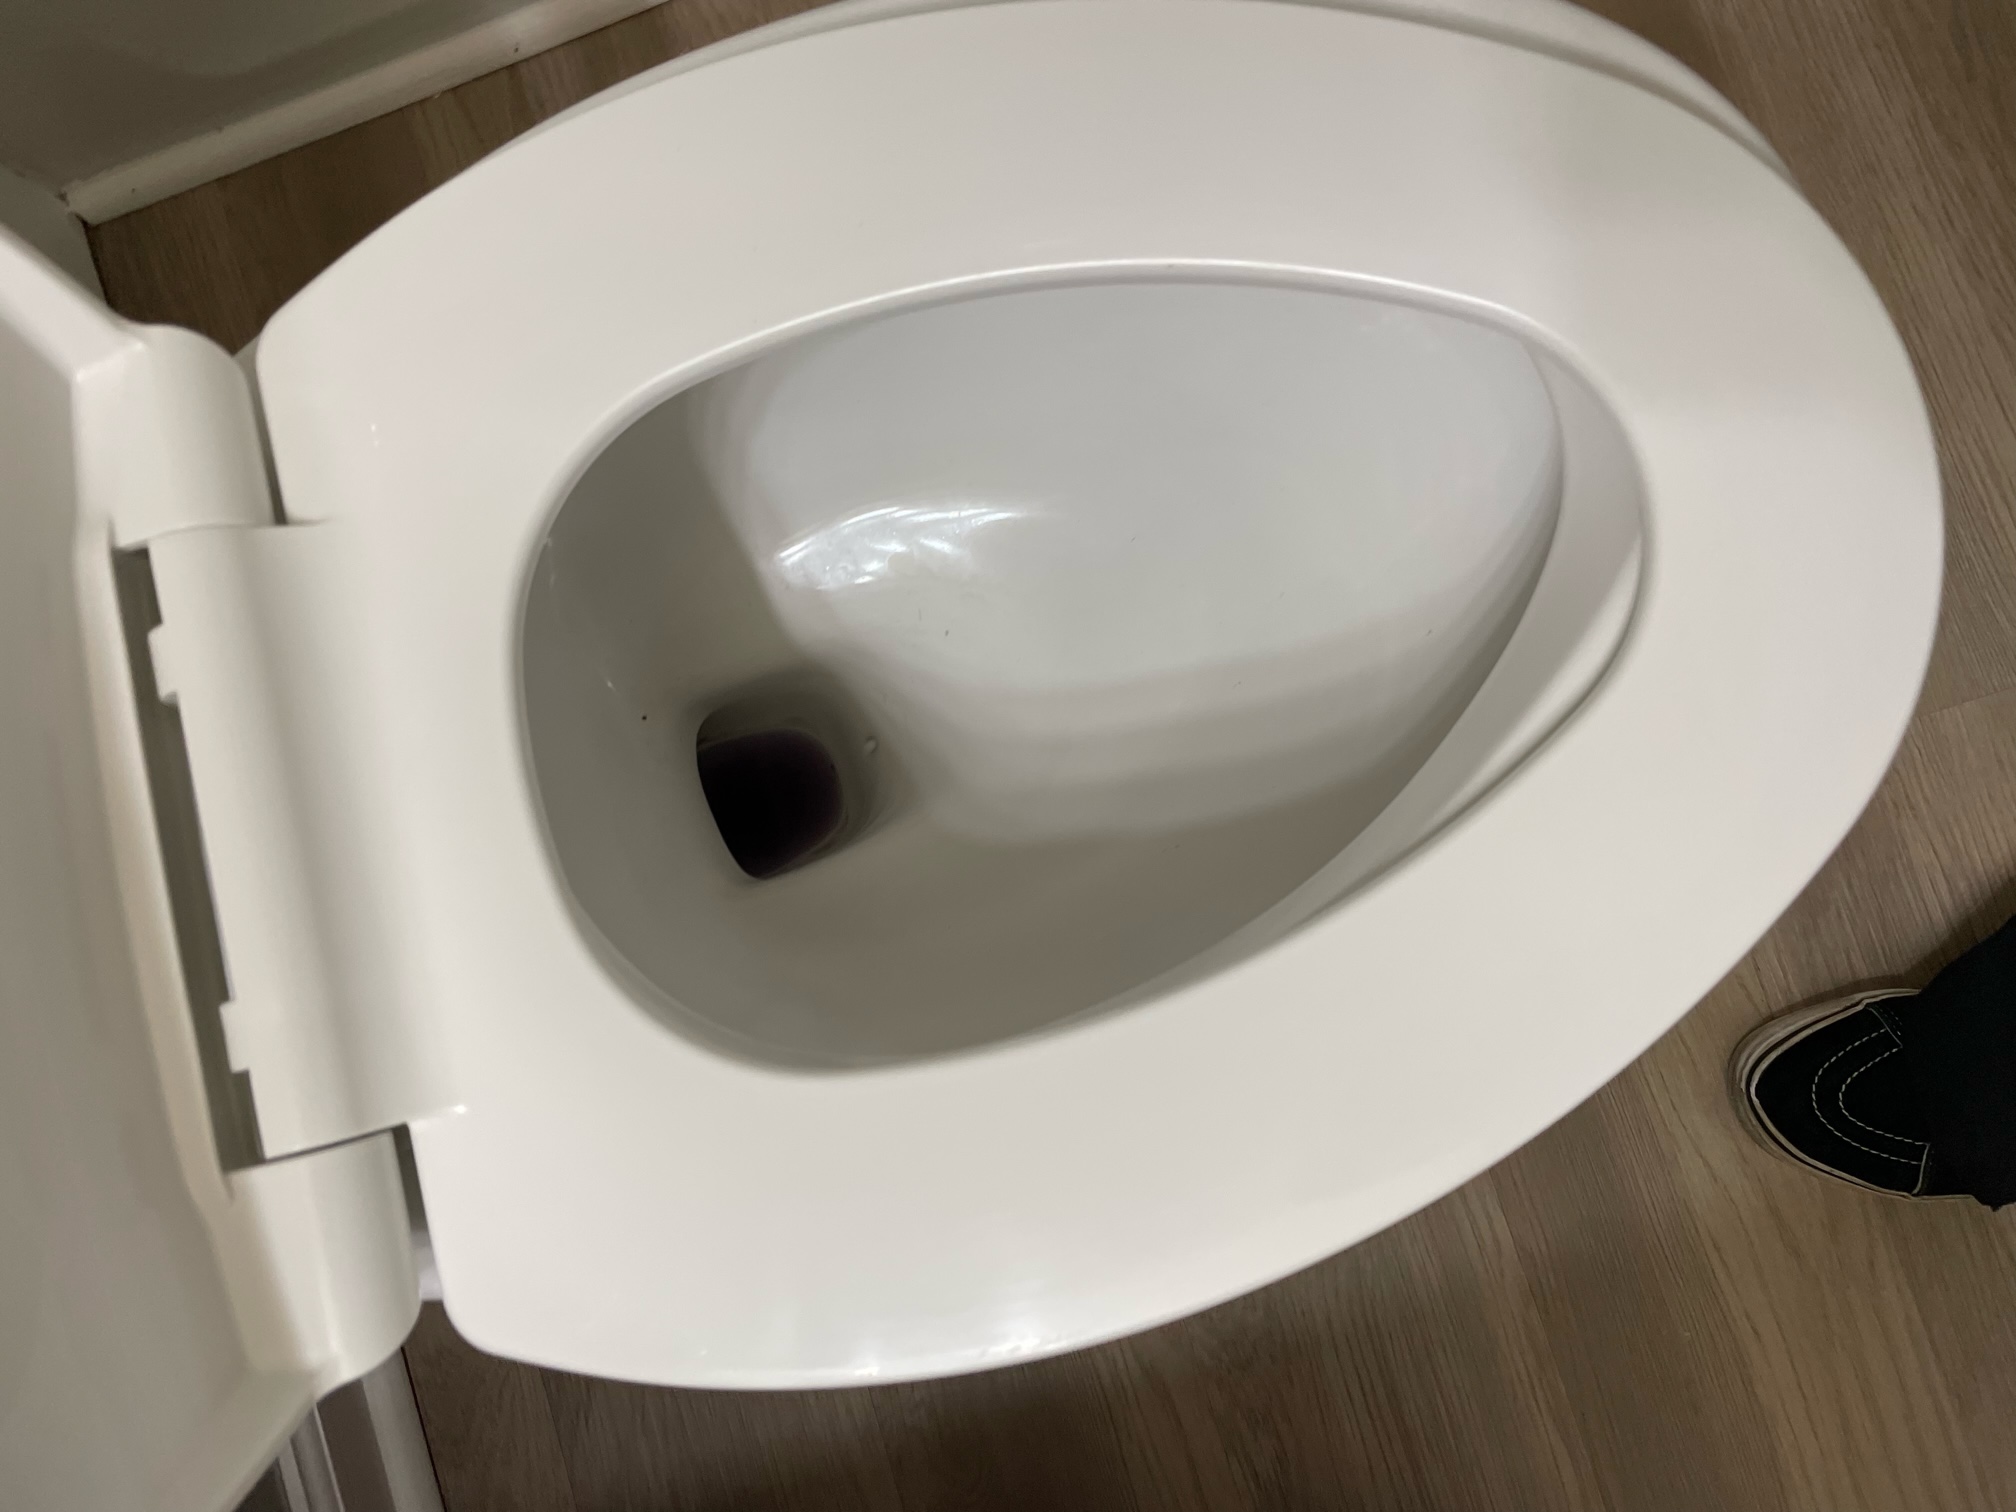 toilet seat broken and it doesn't work